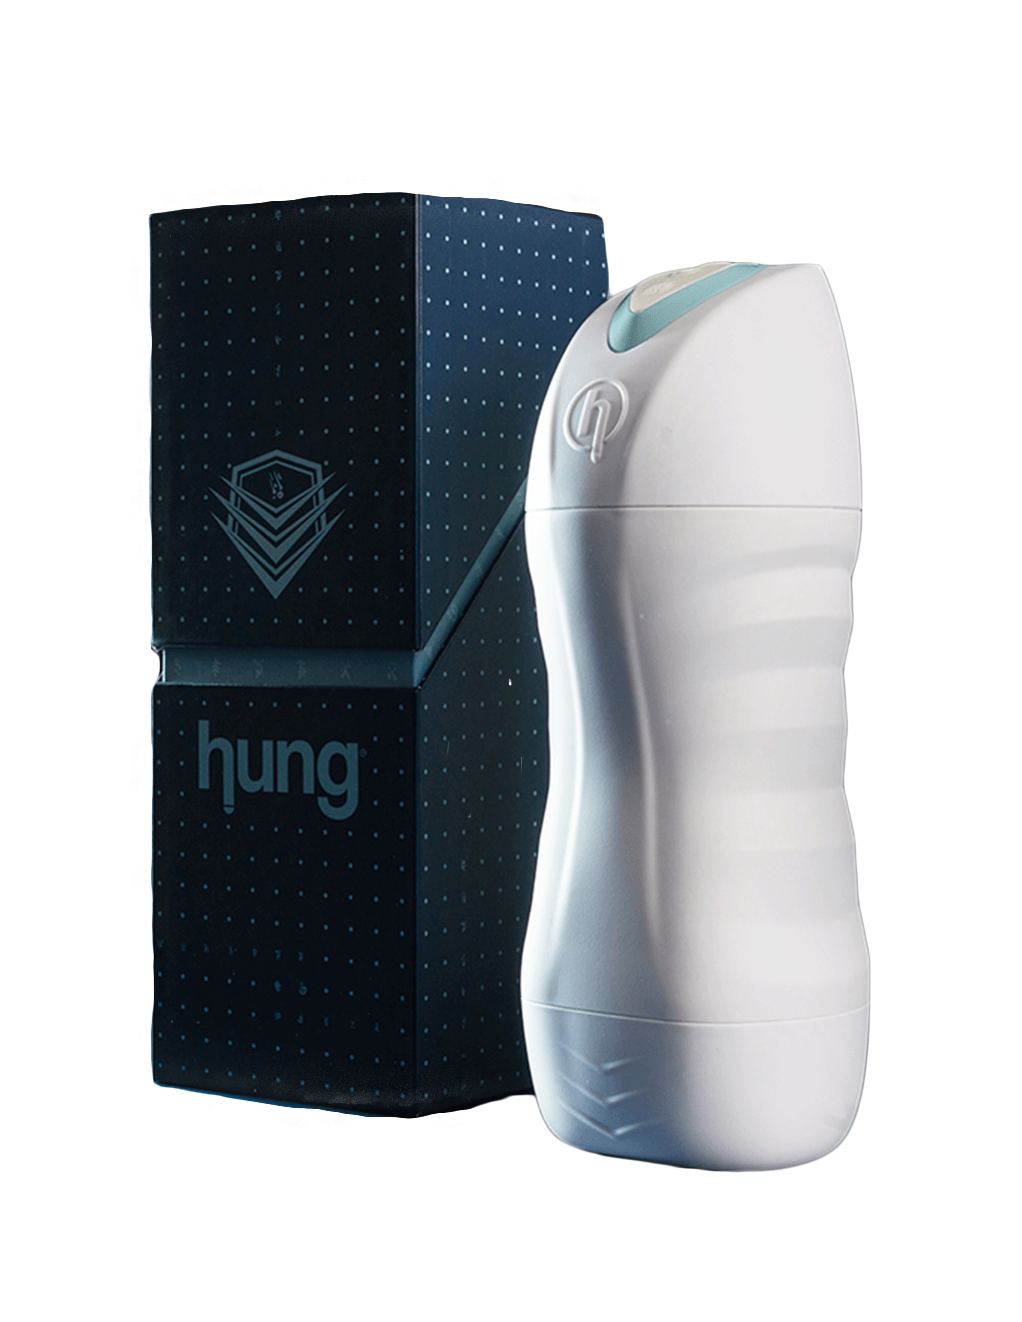 Hung UFO - Product with Box